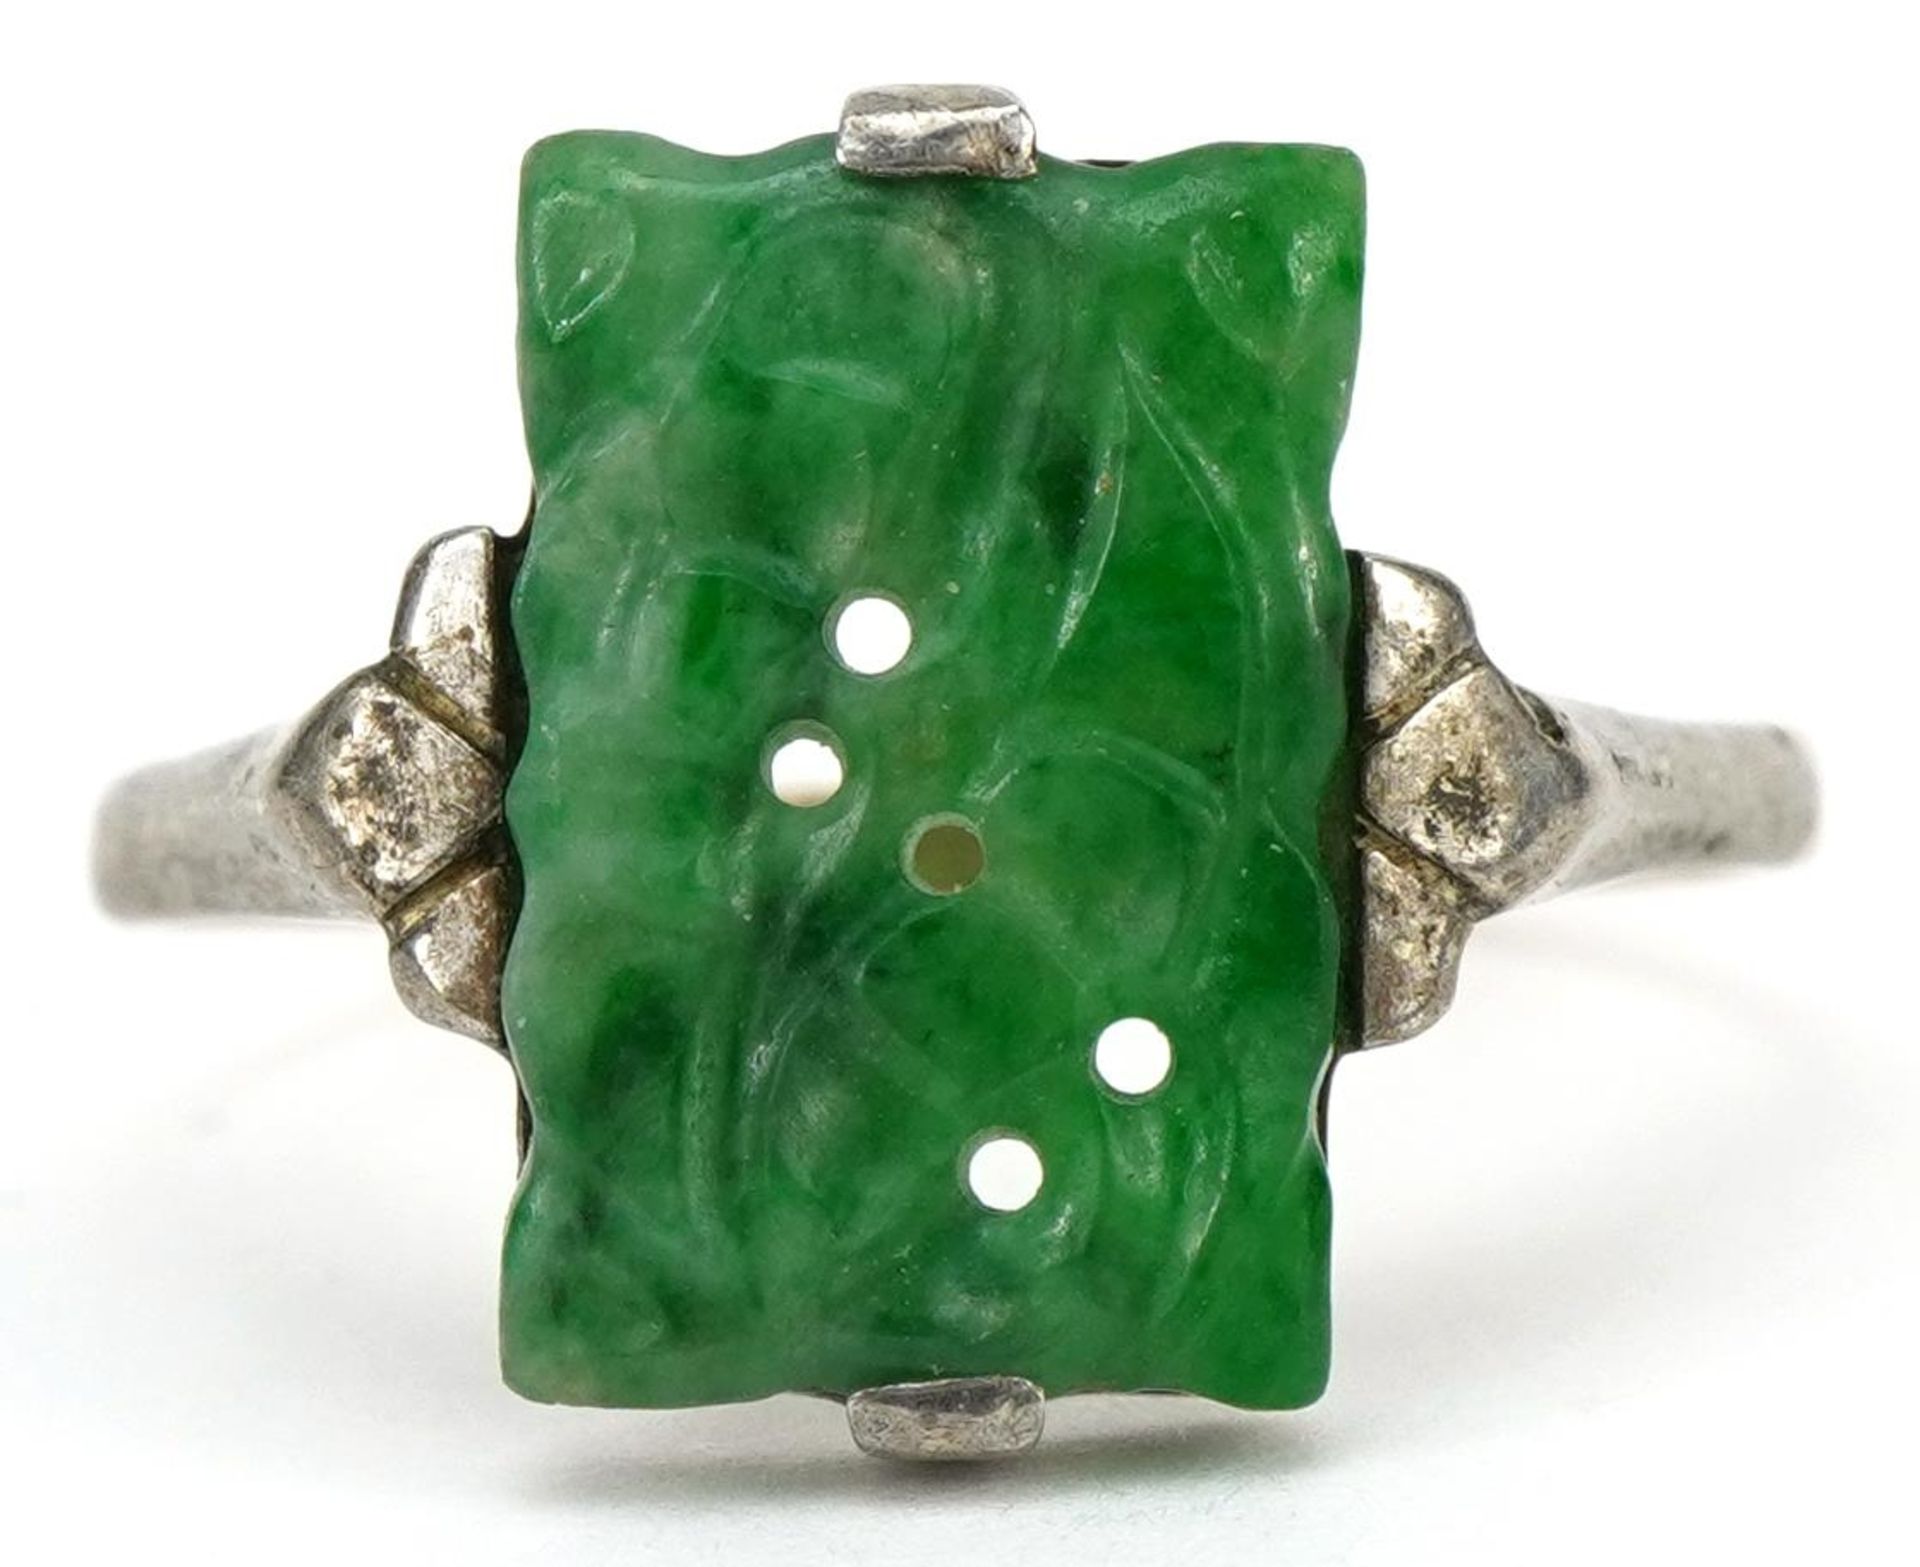 9ct gold and silver carved jade ring, the jade approximately 13.7mm x 9.1mm, size Q/R, 2.8g : For